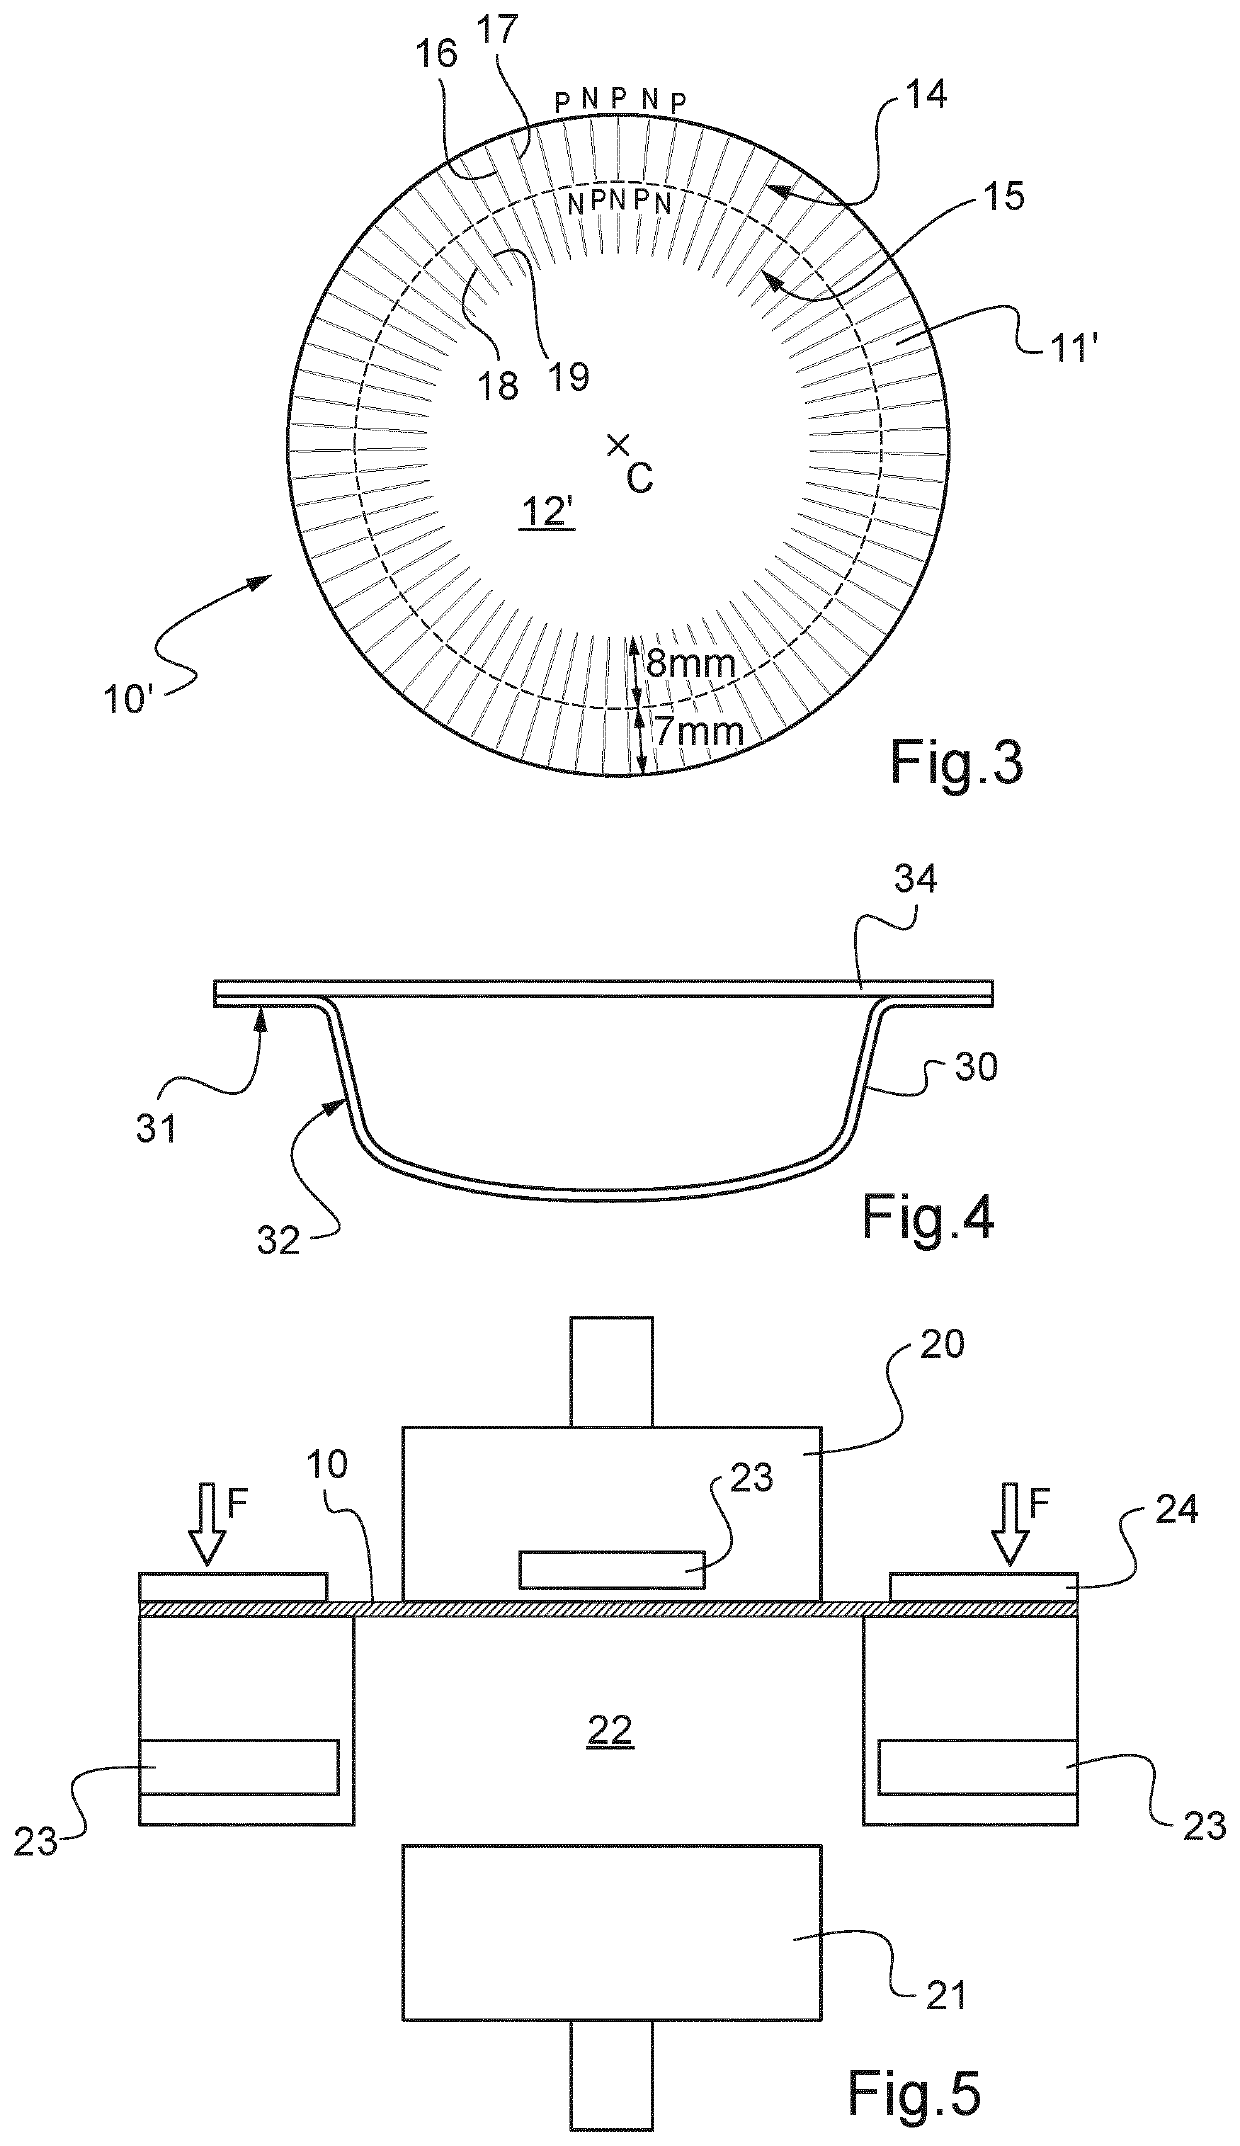 Manufacturing process for producing hermetic single-use food containers such as coffee pods, including a creasing step